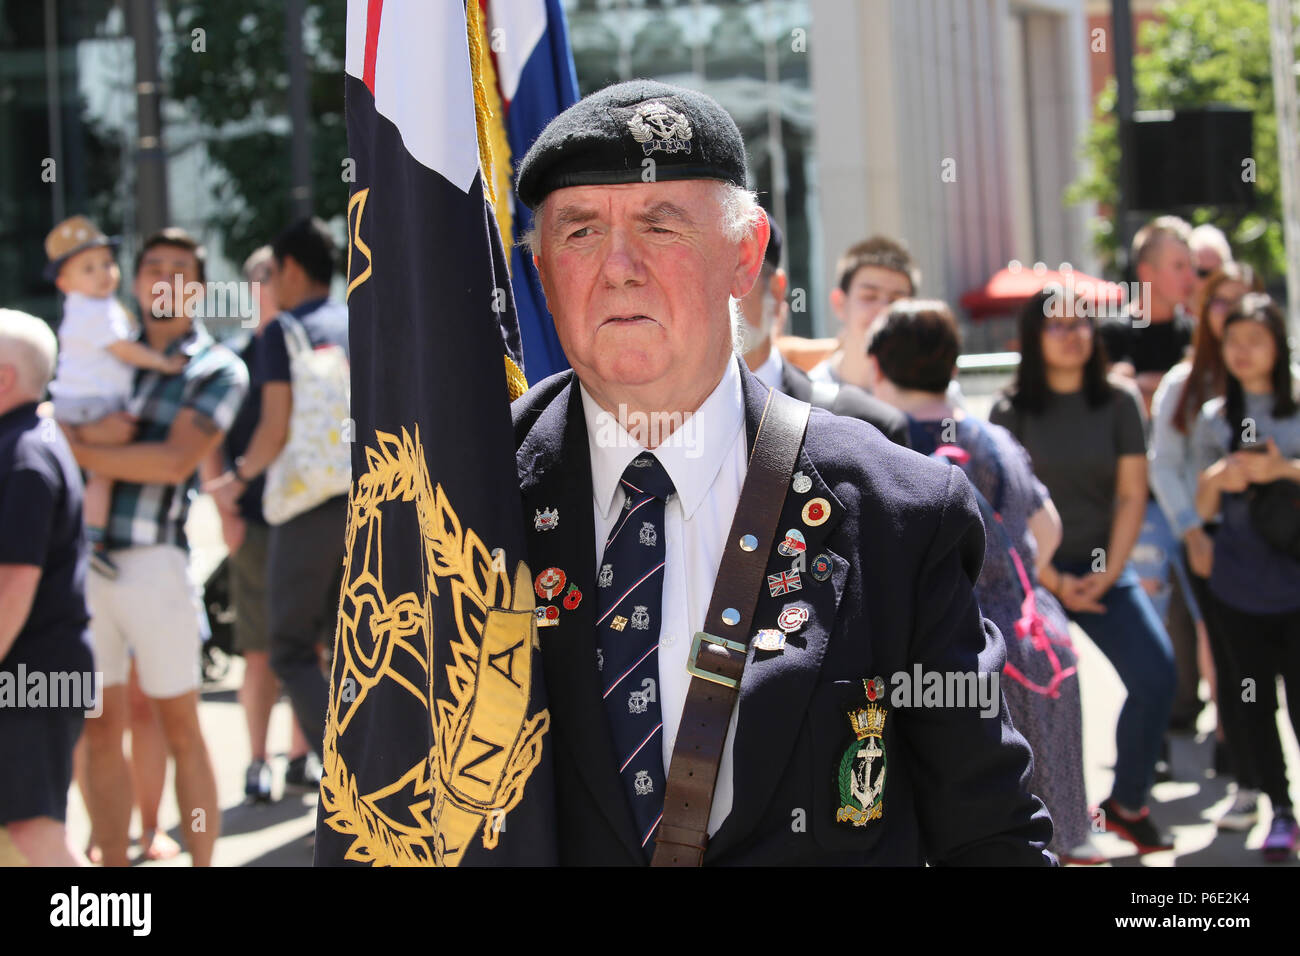 Manchester, UK, 30 June 2018. A veteran holding the standard during celebrations of Armed Forces Day where the public are given the opportunity to meet members of the armed forces and talk to them about the work they do, St Peters Square, Manchester, 30th June, 2018 (C)Barbara Cook/Alamy Live News Stock Photo